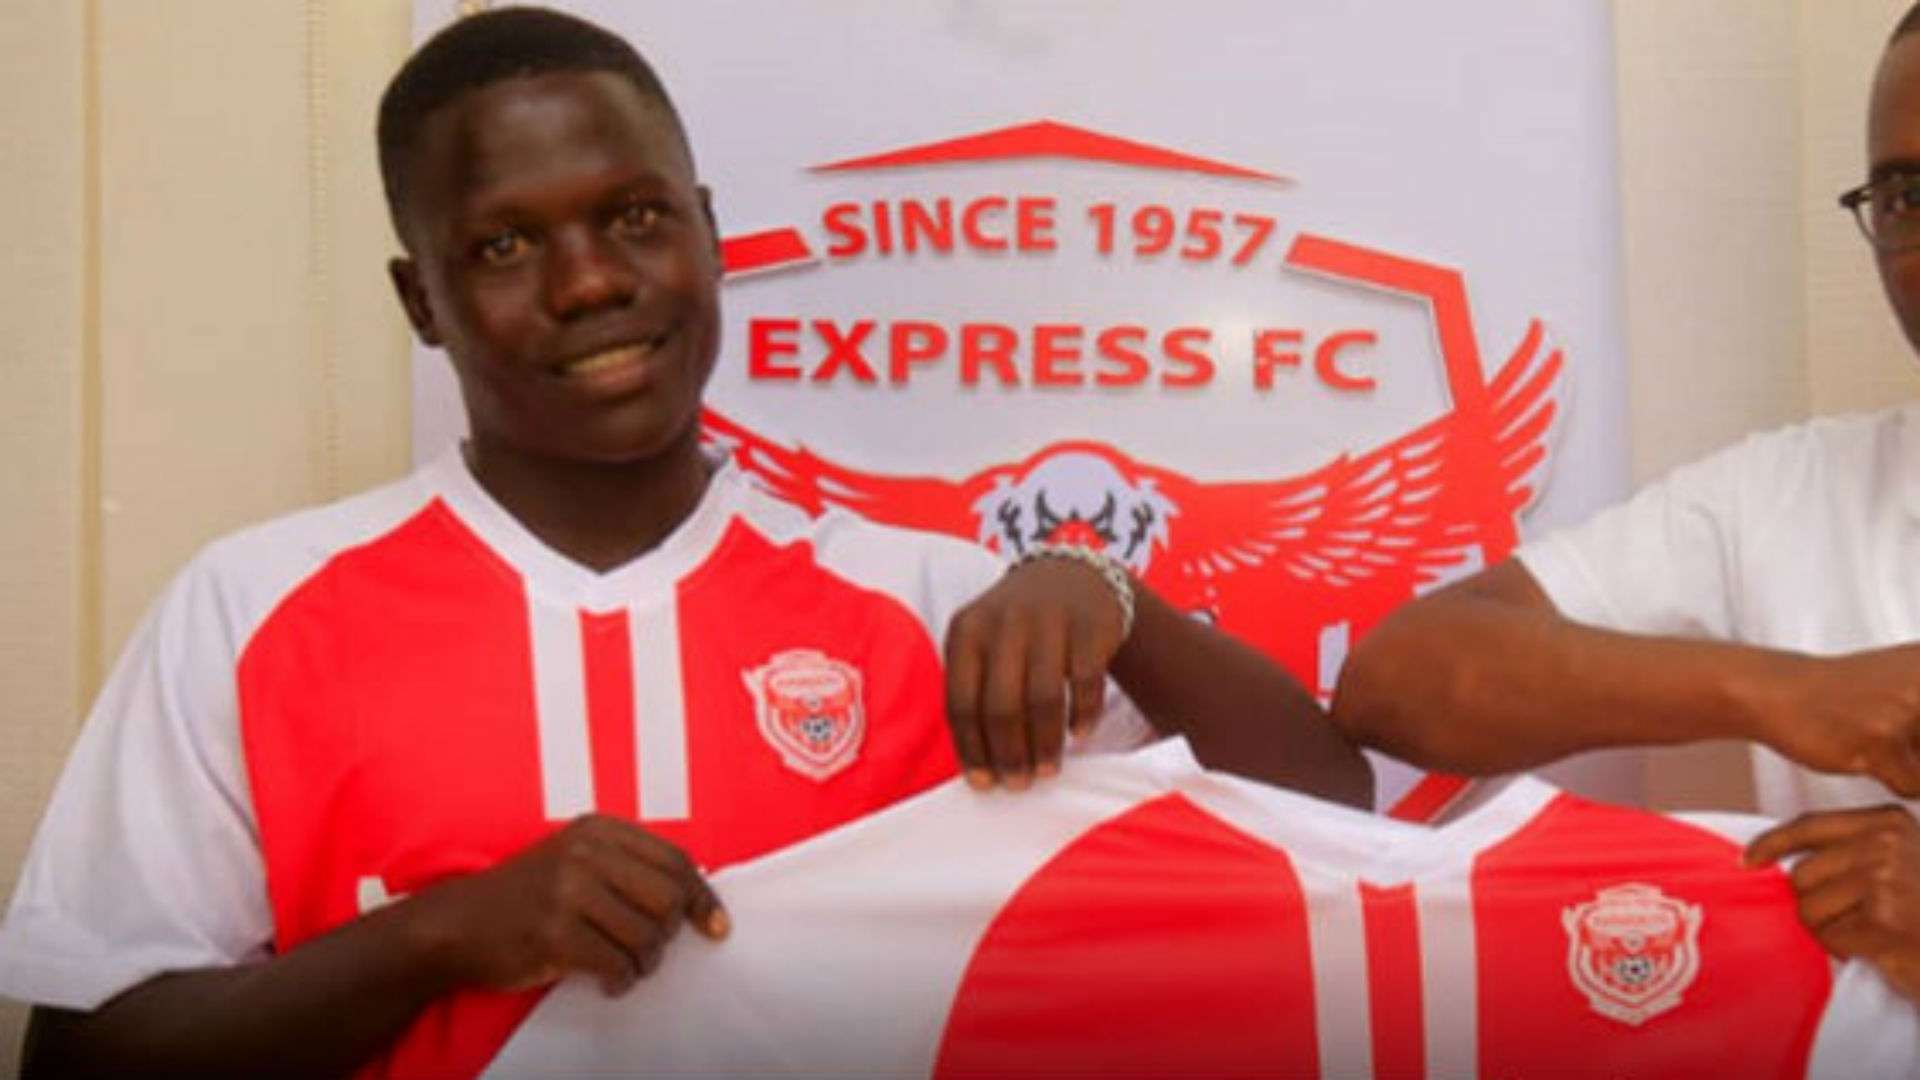 Express FC on Monday 26th October signed midfielder Ivan Mayanja.